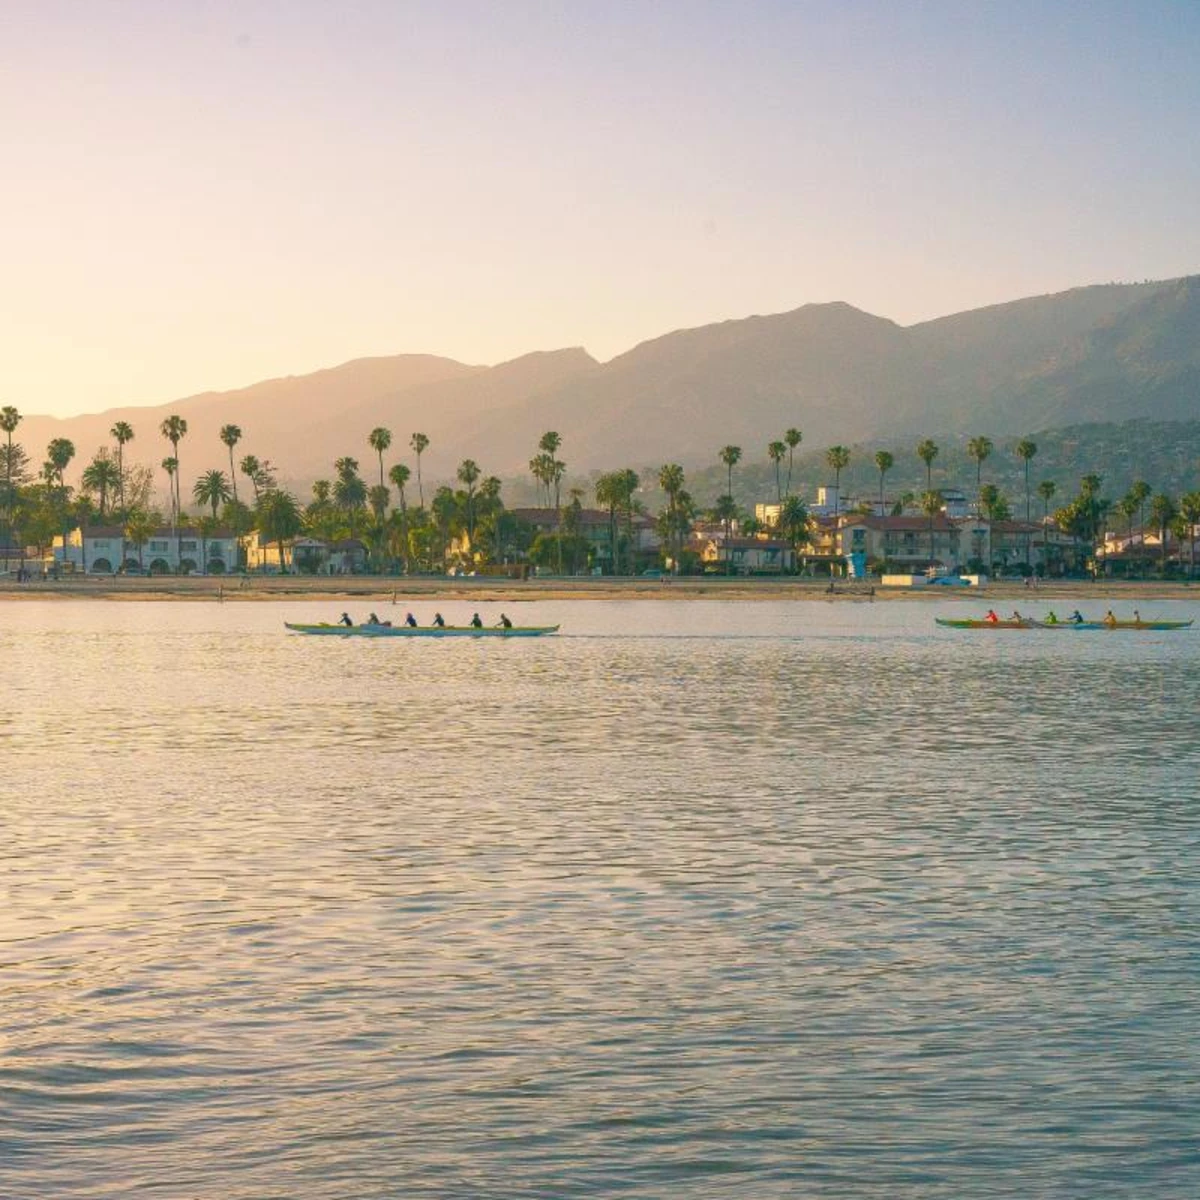 Flat and straight coastline lined with palm trees and boutique shops by ocean in Santa Barbara.